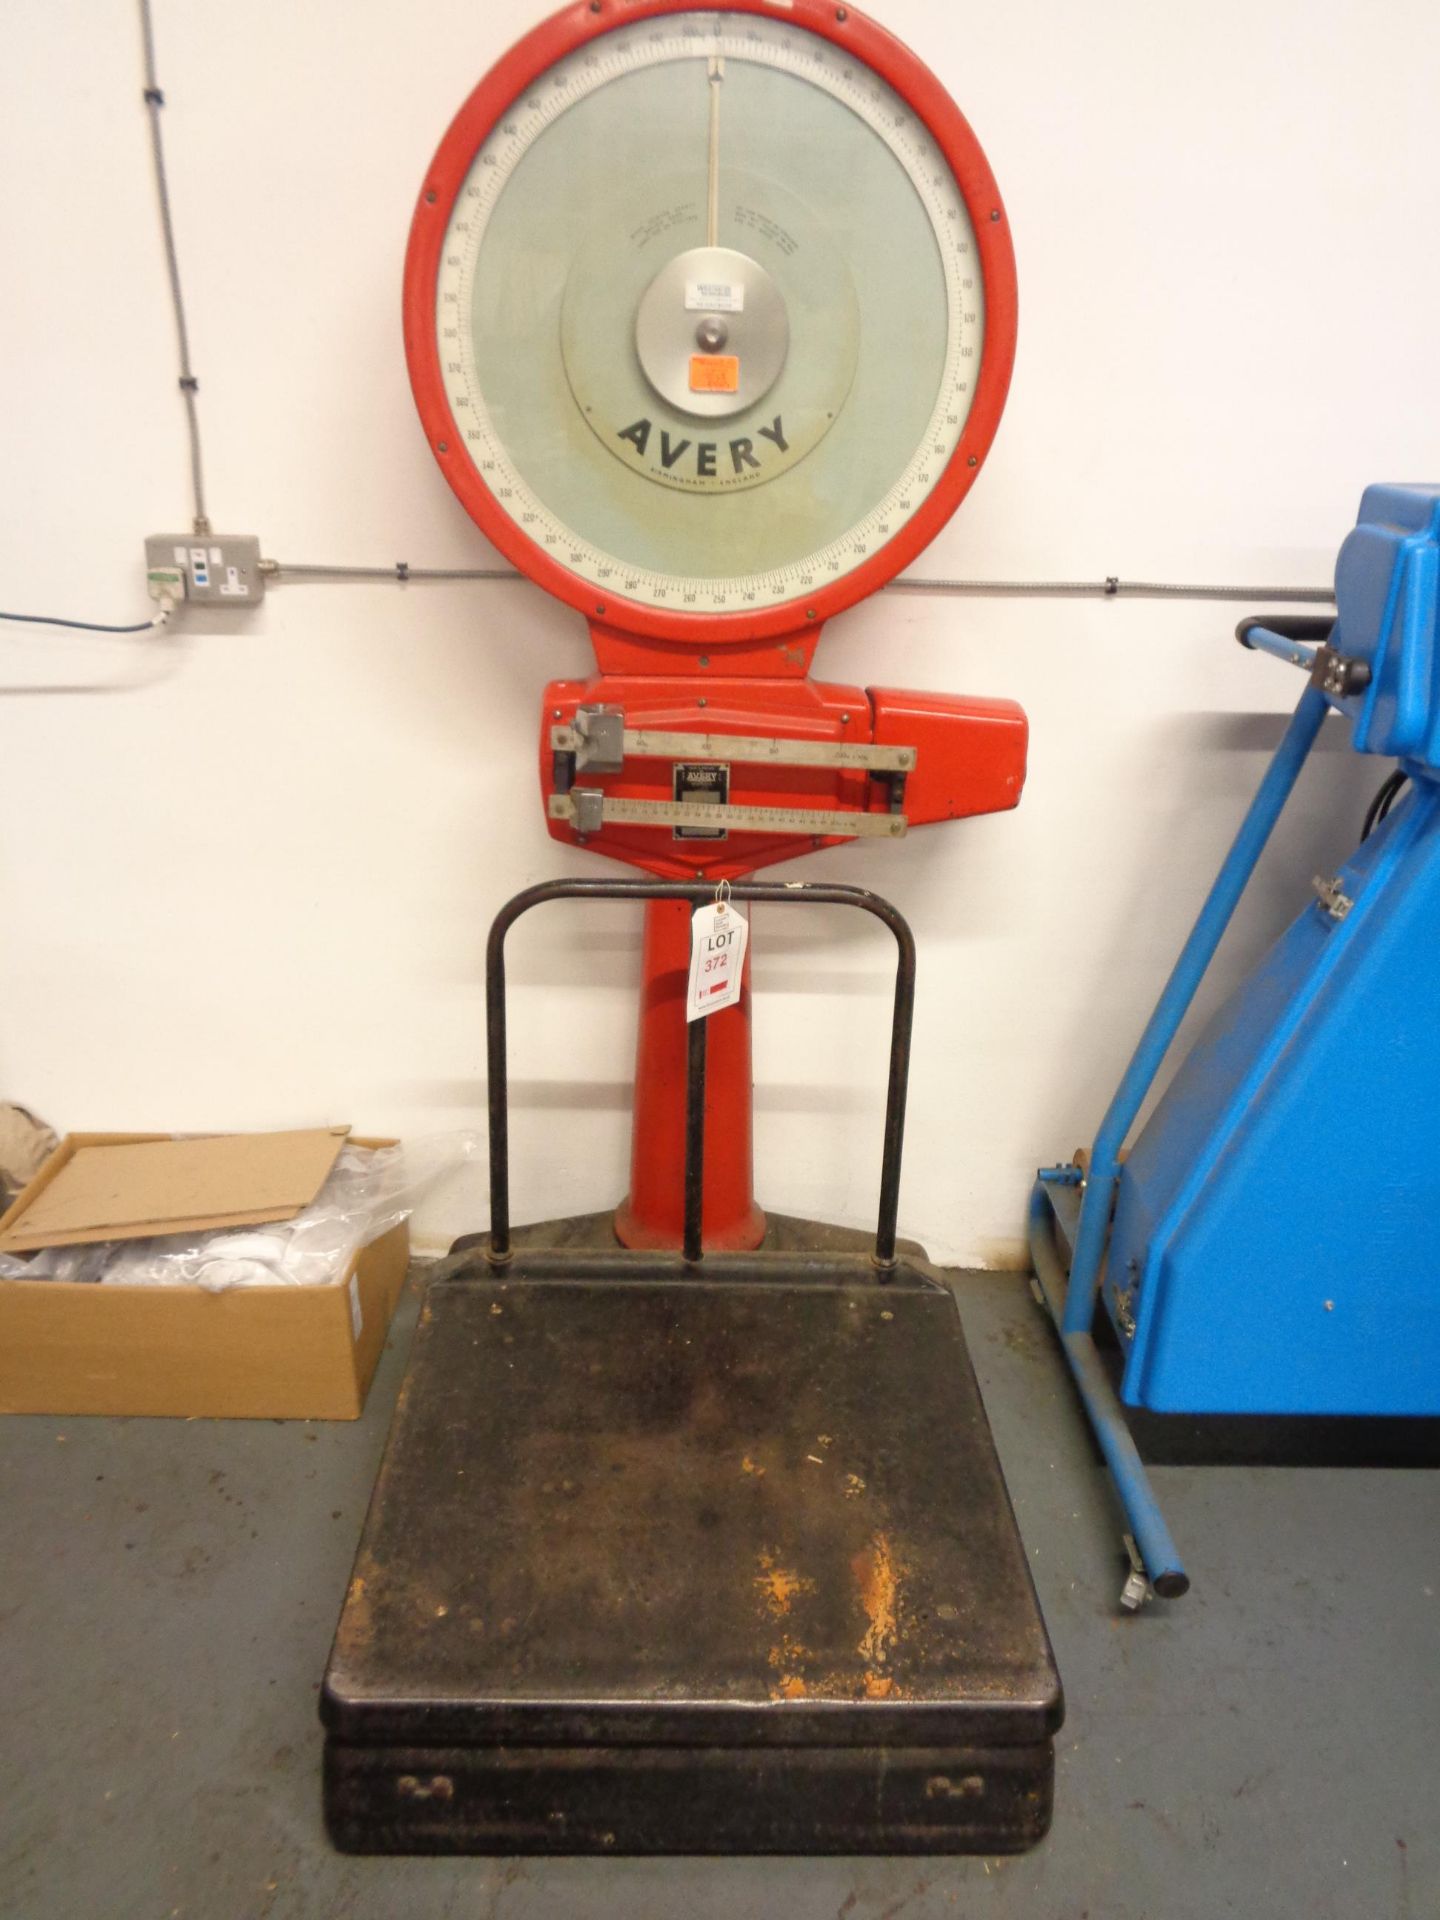 Avery 3205 CFE weigh scales, serial no. B573050-3 capacity 15CWT by 2LB divisions